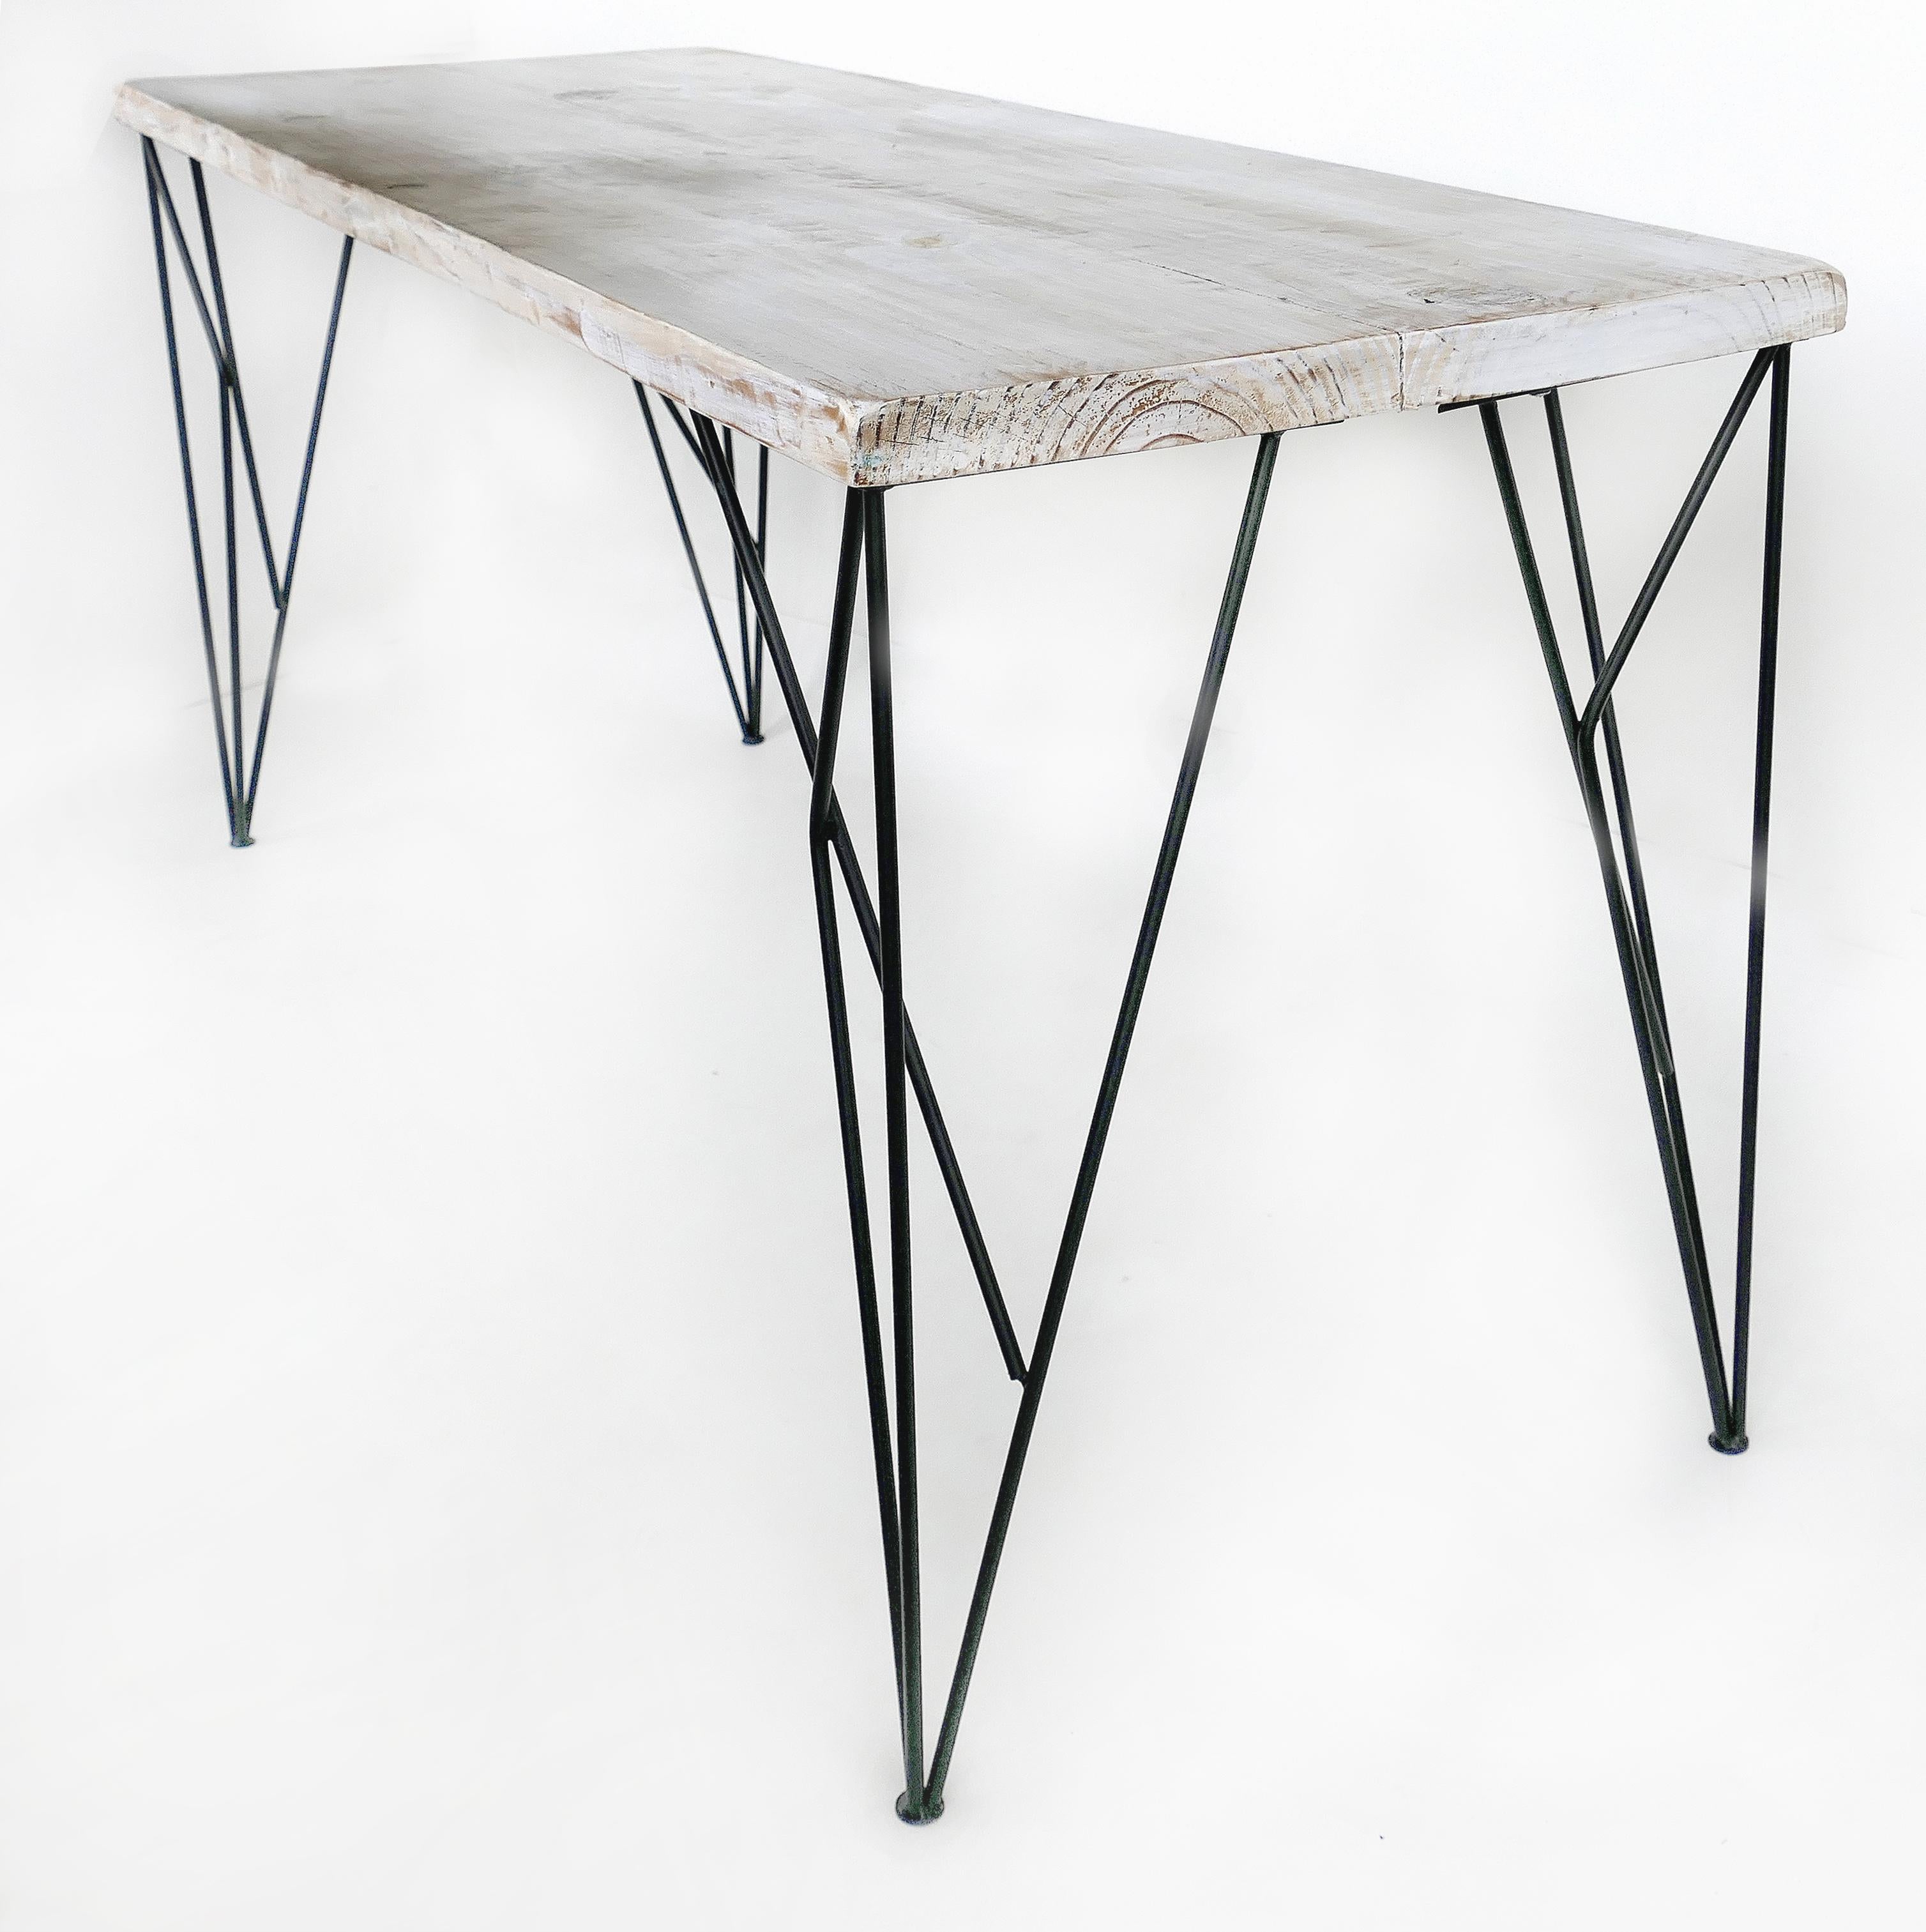 Rustic whitewashed console/work table with iron legs

Offered for sale is a rustic whitewashed wood des, console or work table with contemporary iron legs. The table combines the natural feel of the rustic wood with sturdy architectural legs. The